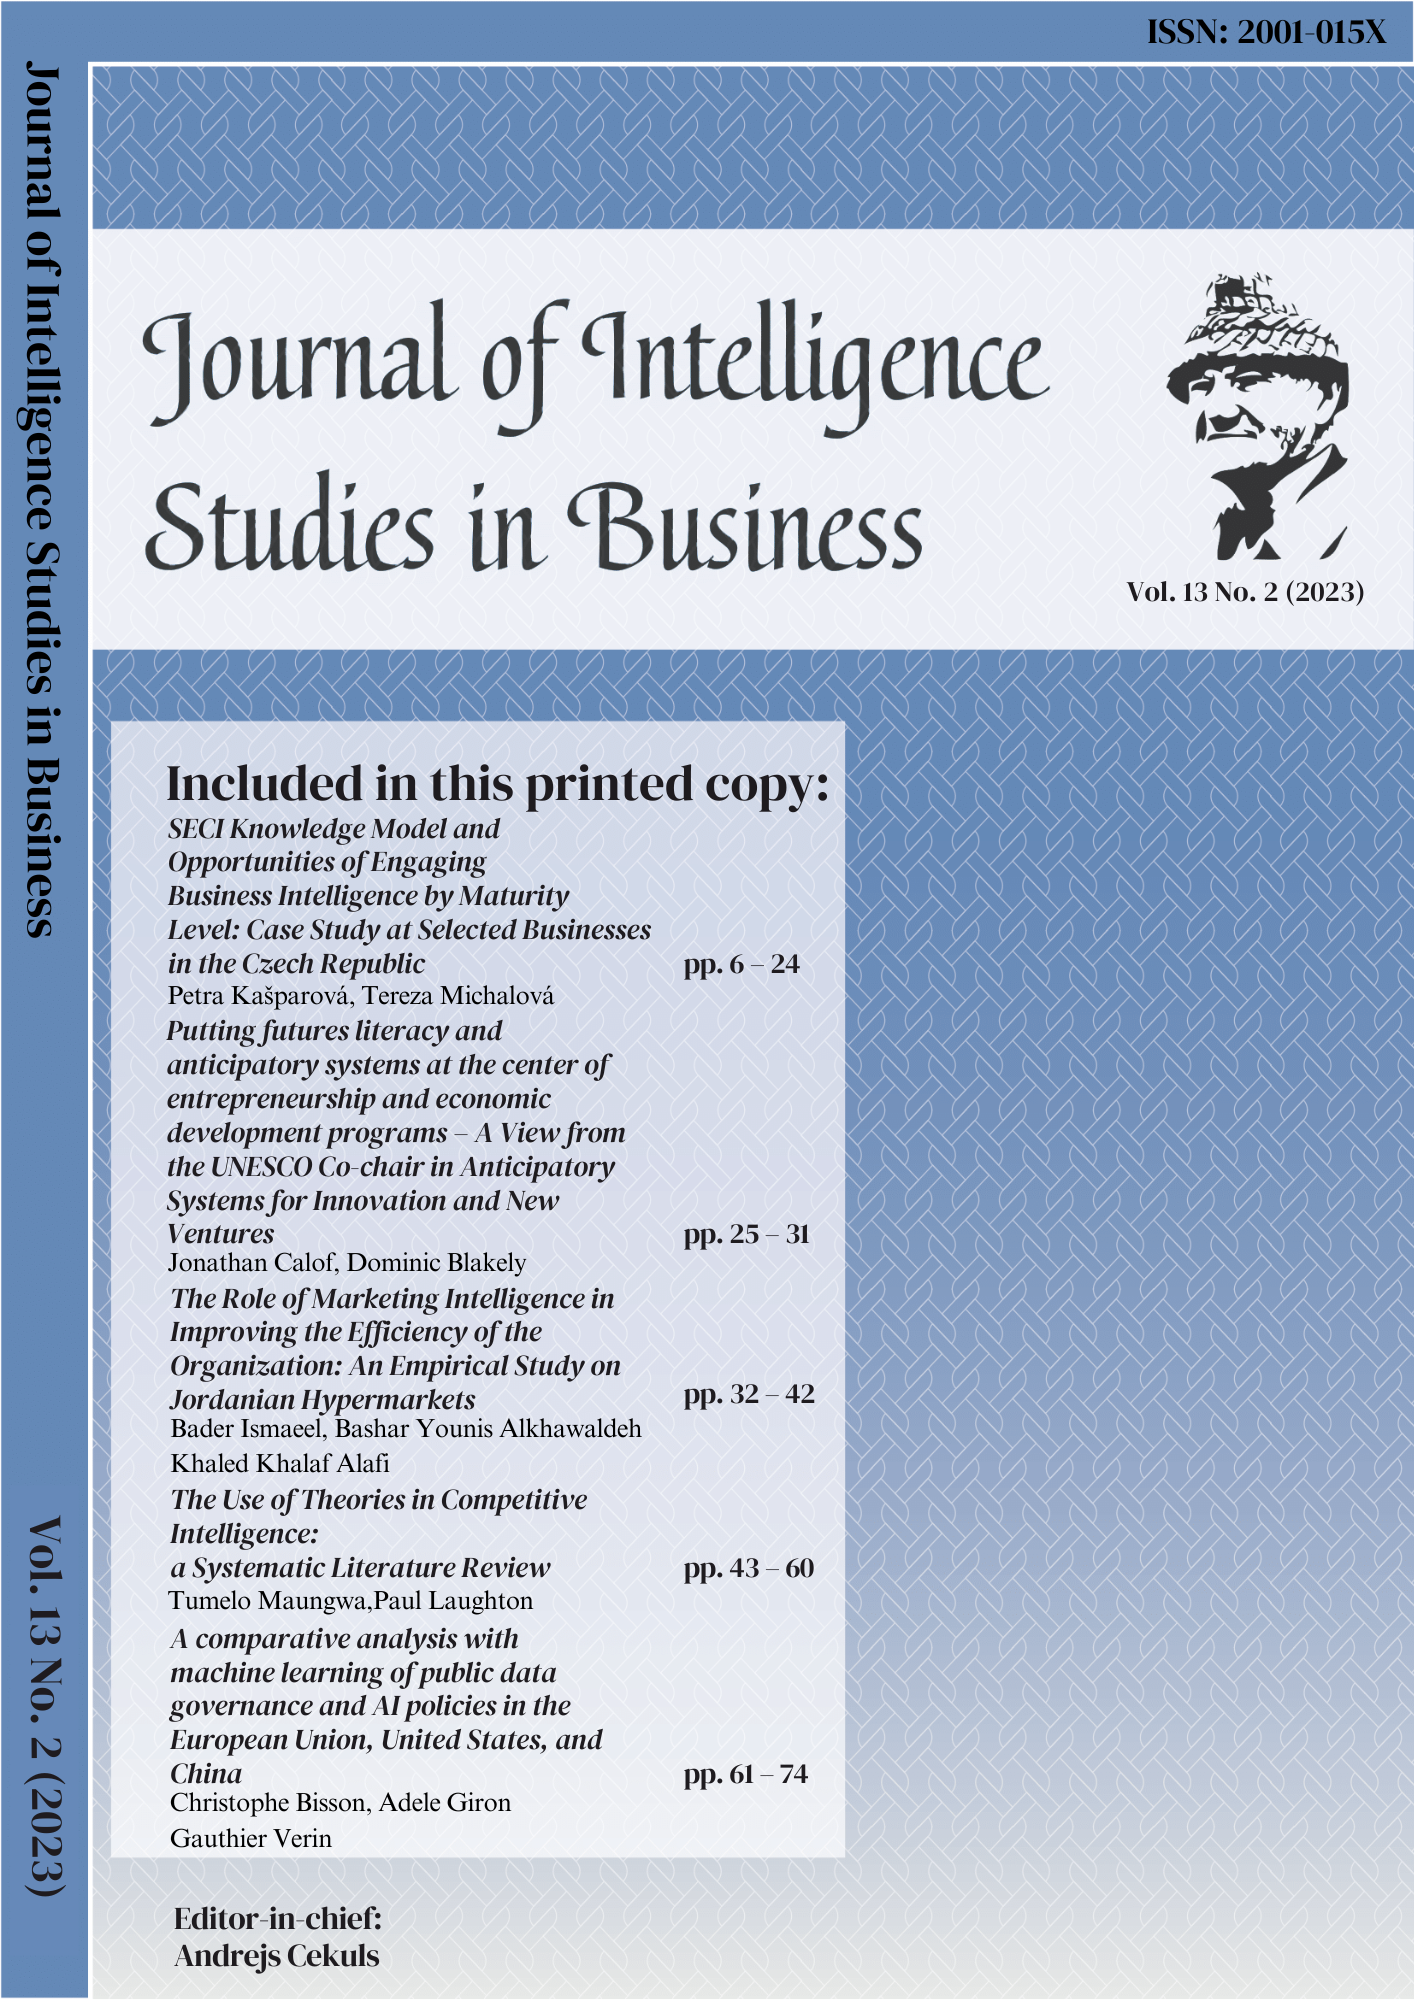 					View Vol. 13 No. 2 (2023): Journal of Intelligence Studies in Business
				